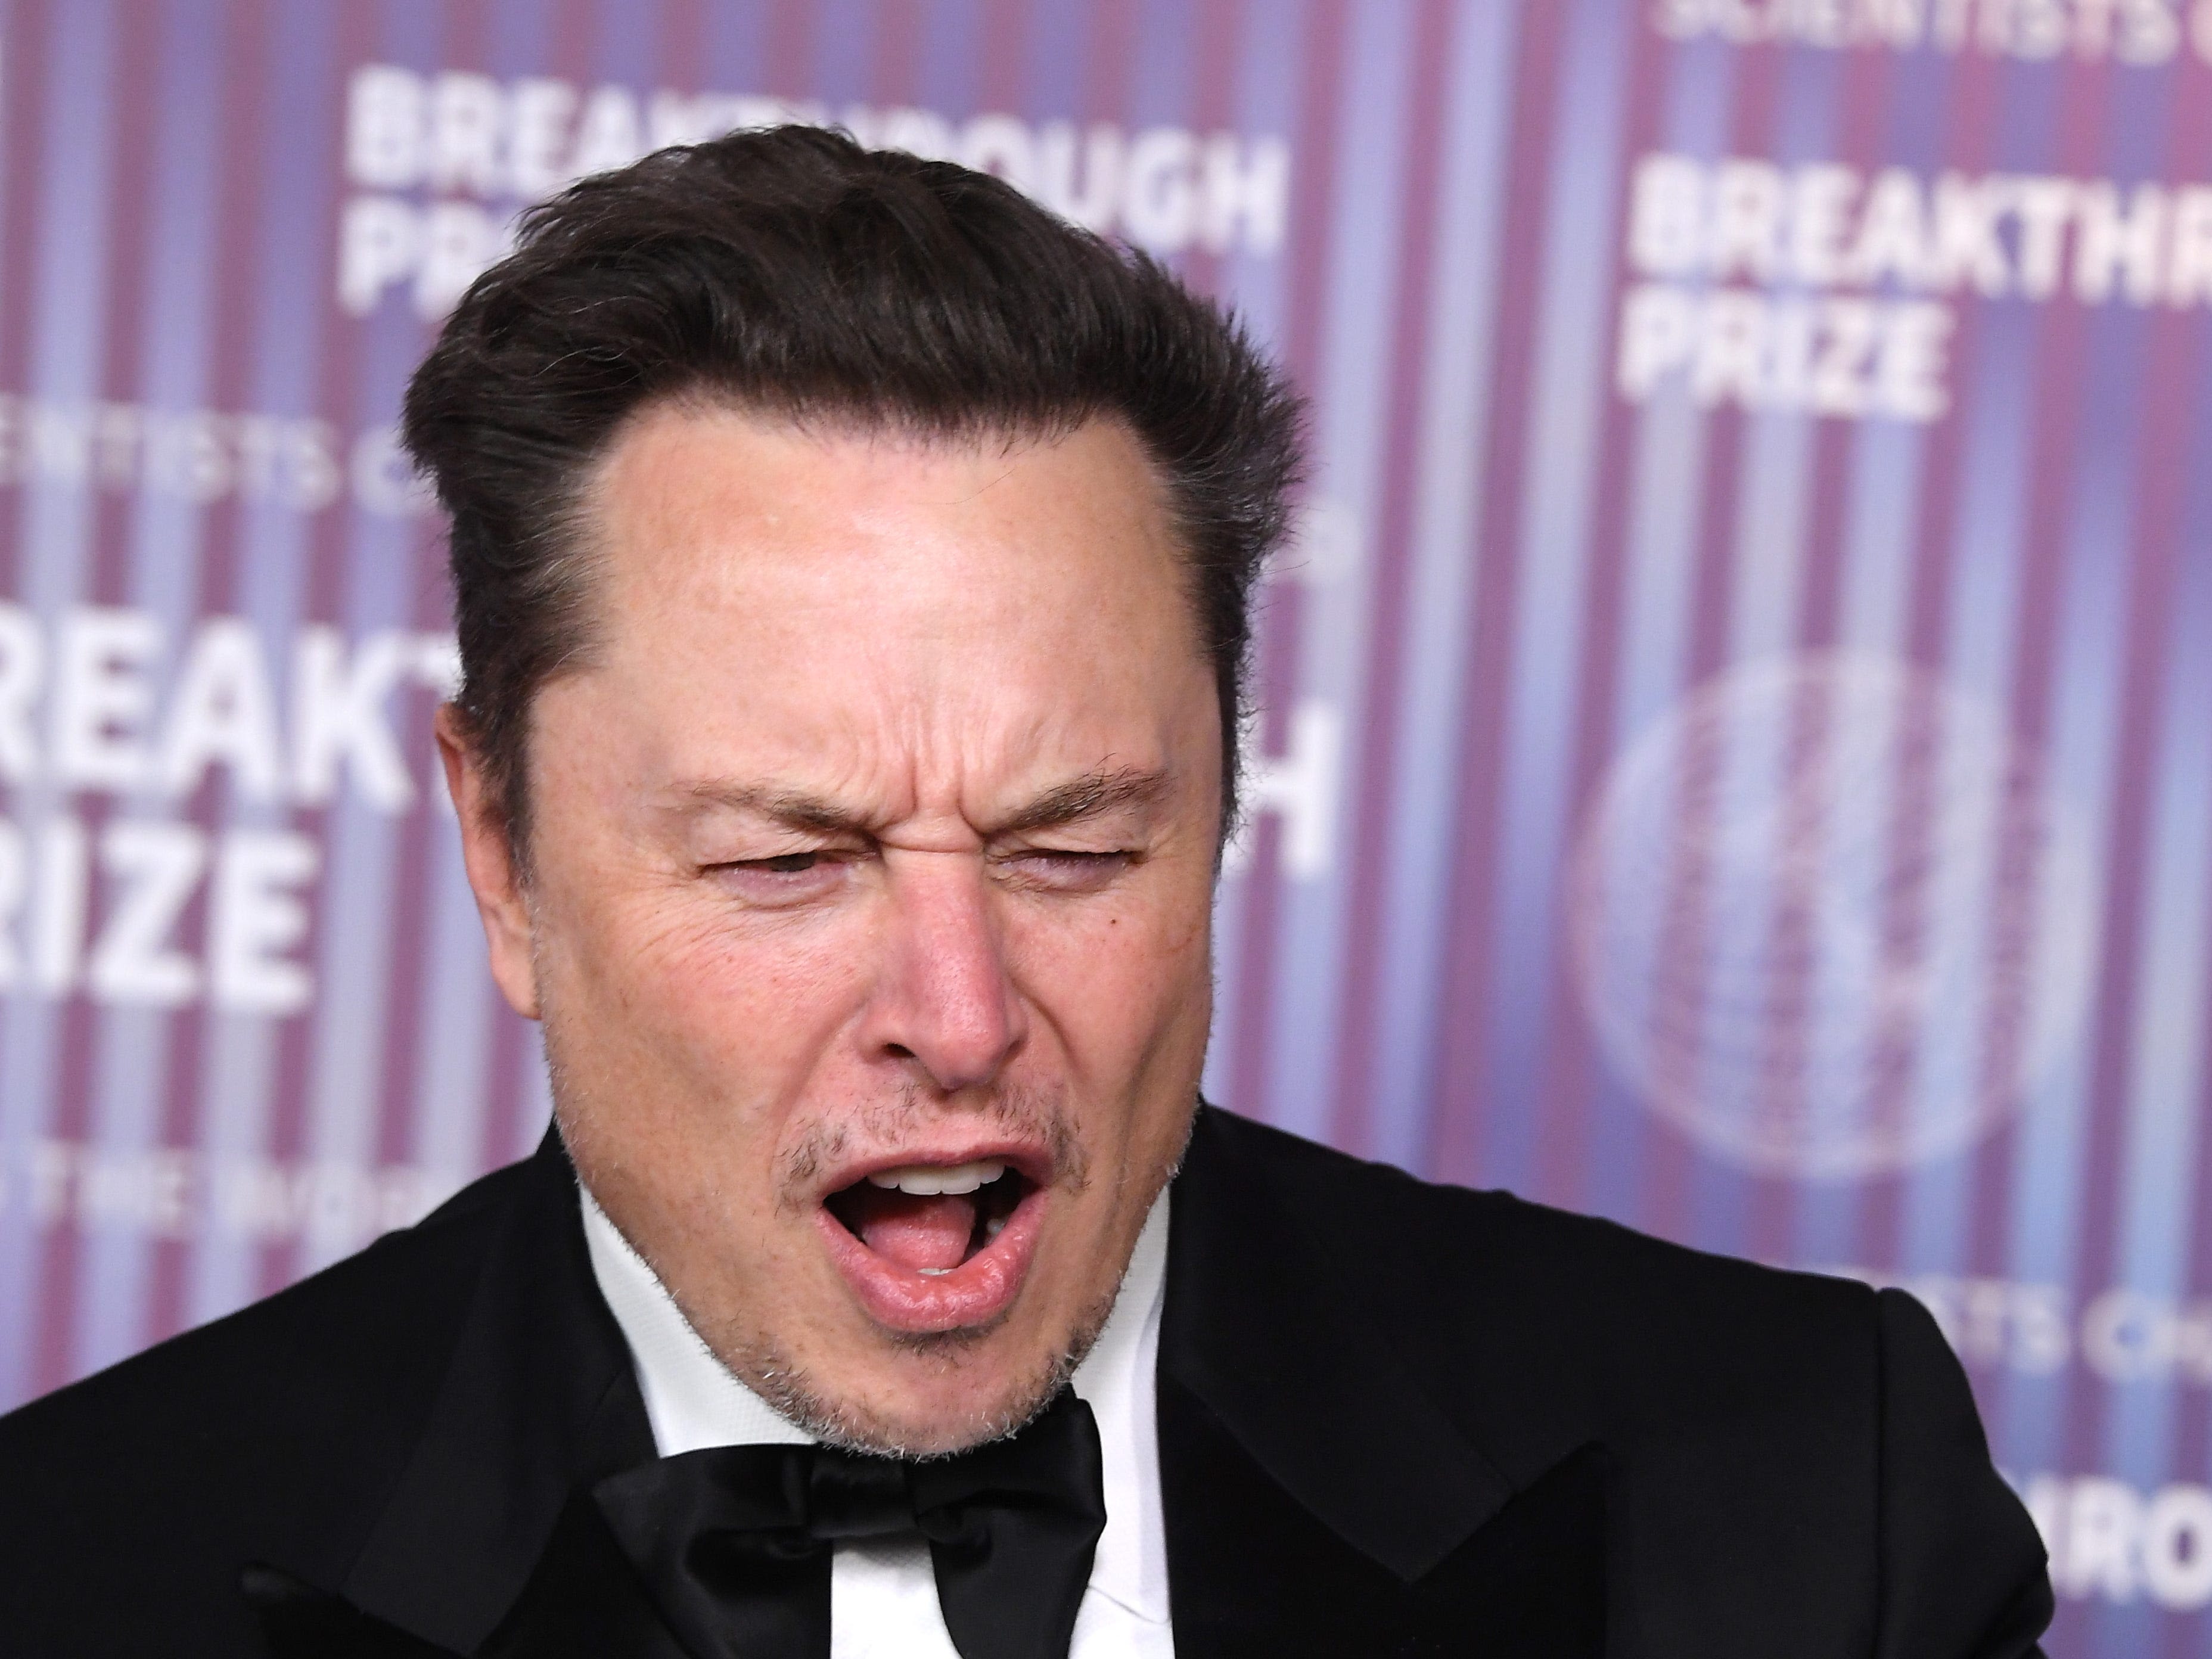 Tesla is pulling out all the stops to get Elon Musk his $47 billion pay package